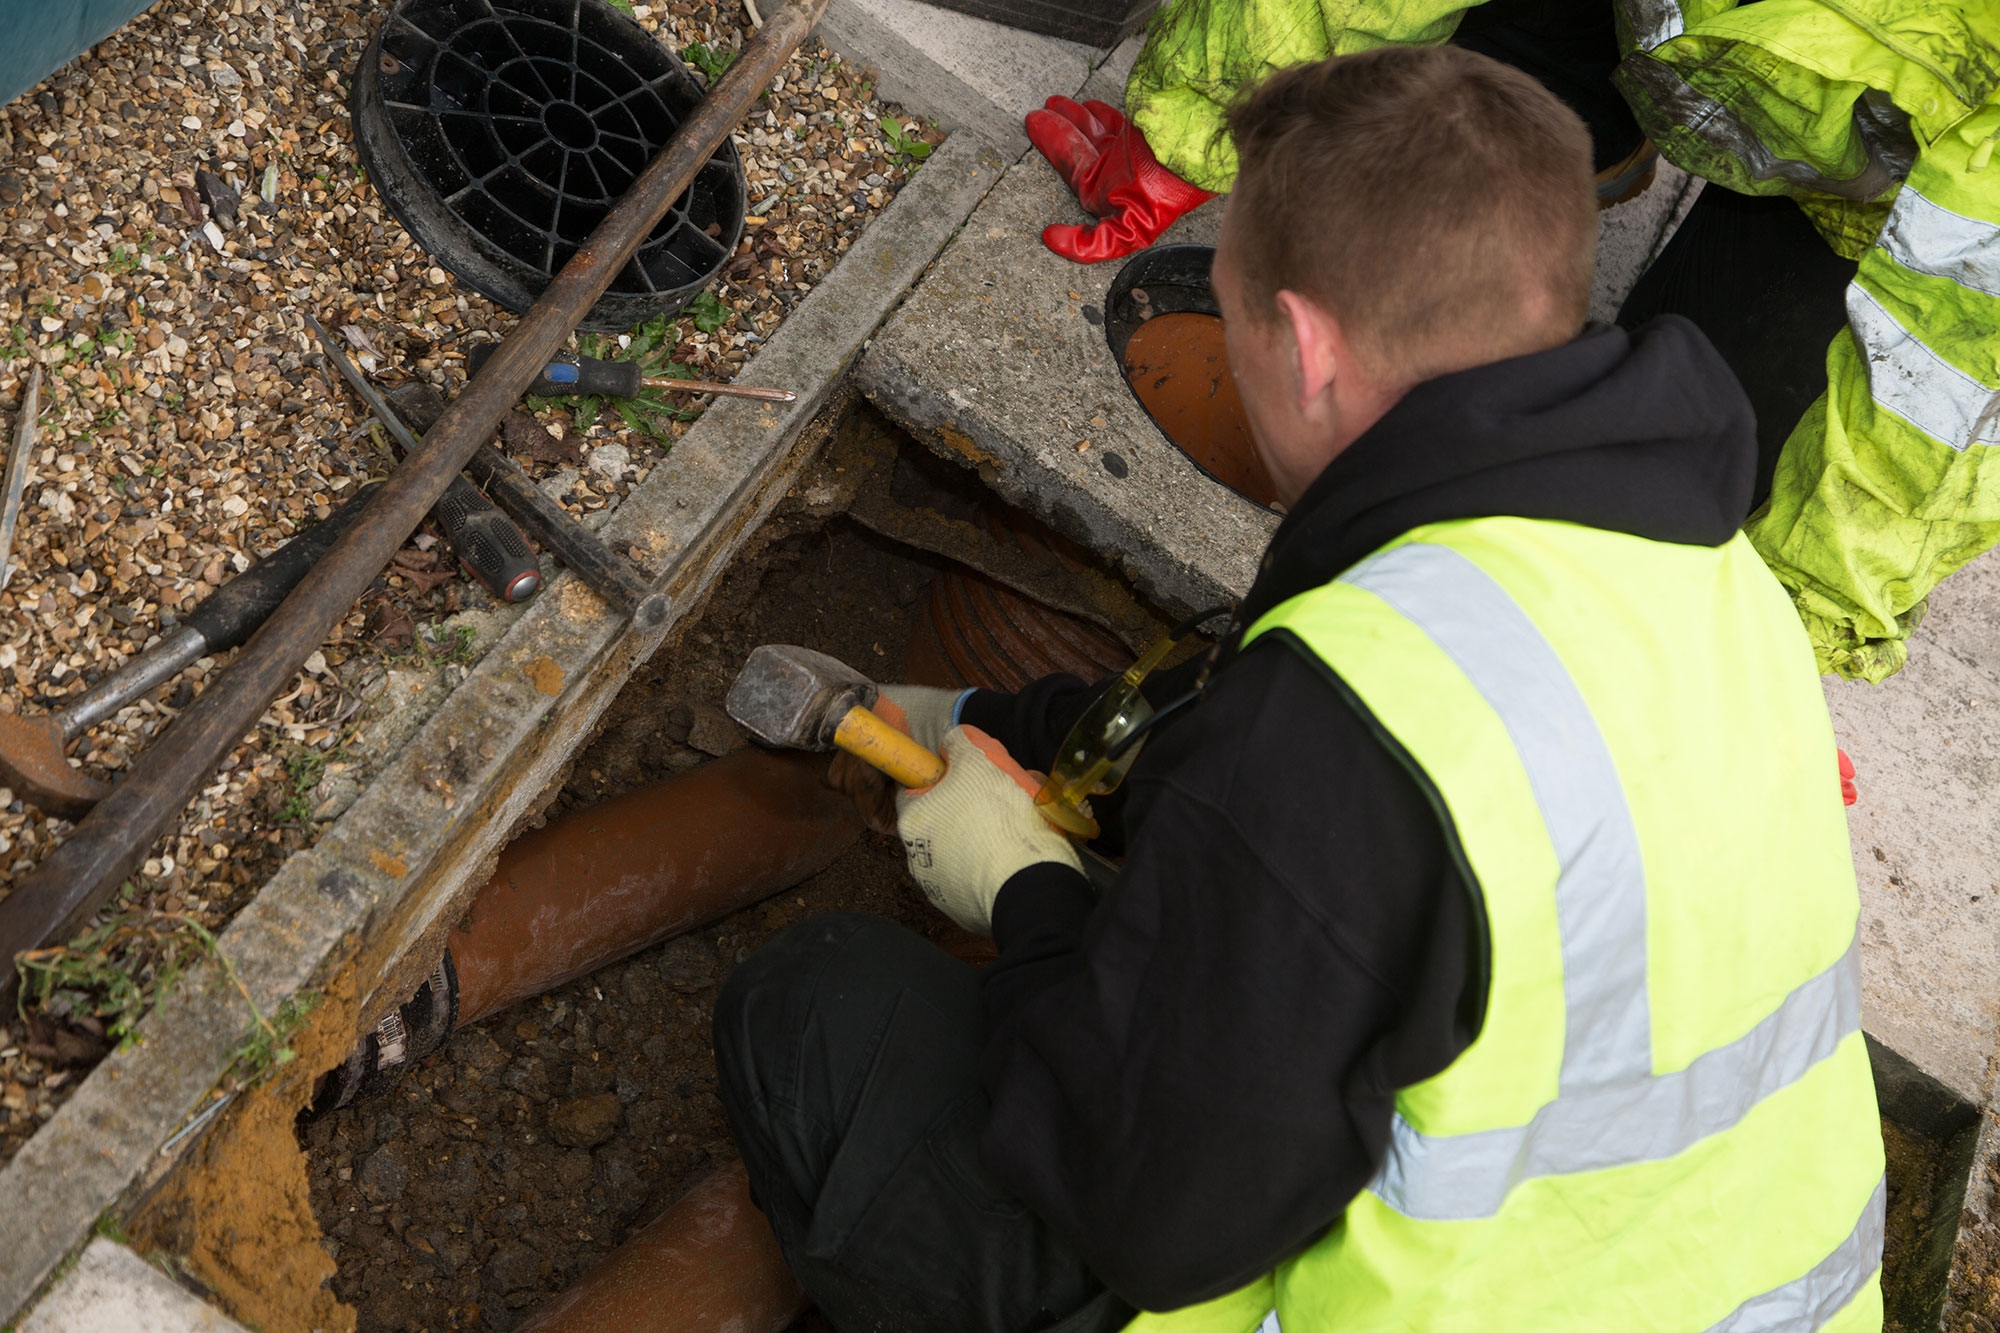 Block sewer services from 1st Call Drain Clearance & Technical Services